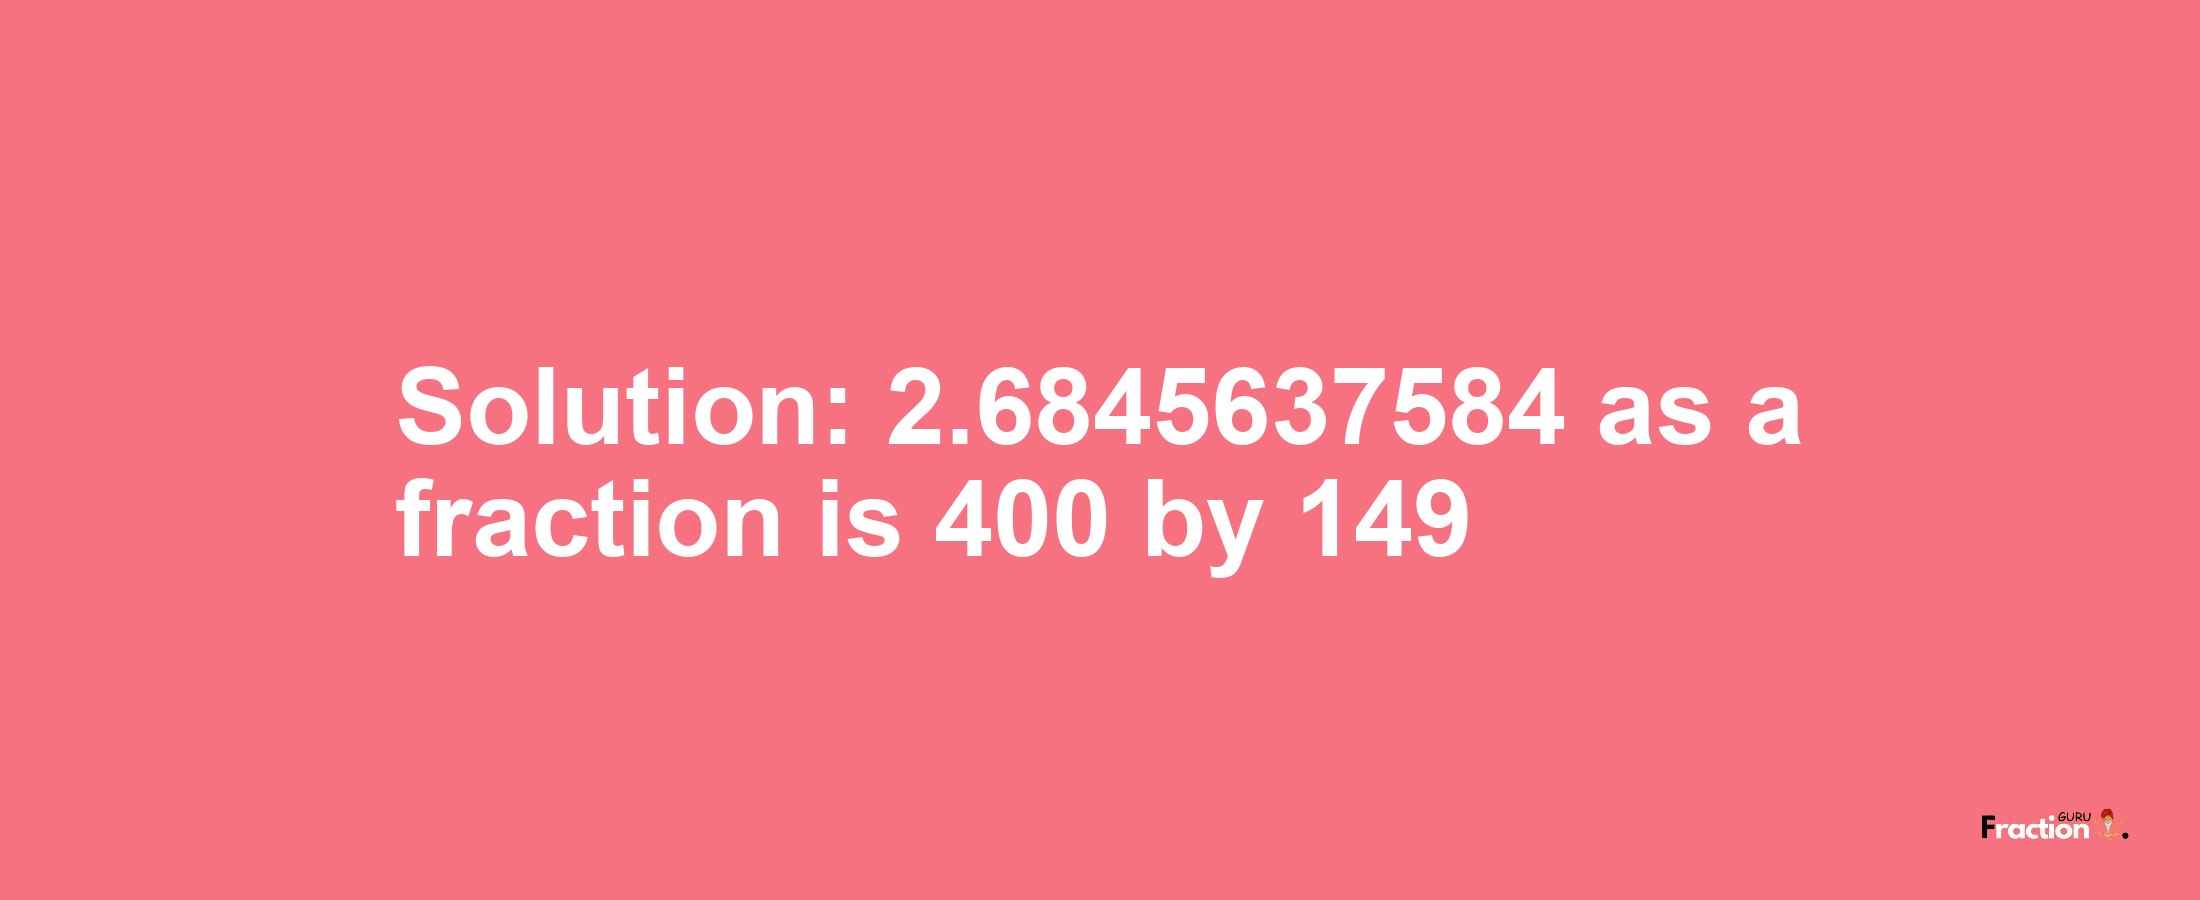 Solution:2.6845637584 as a fraction is 400/149